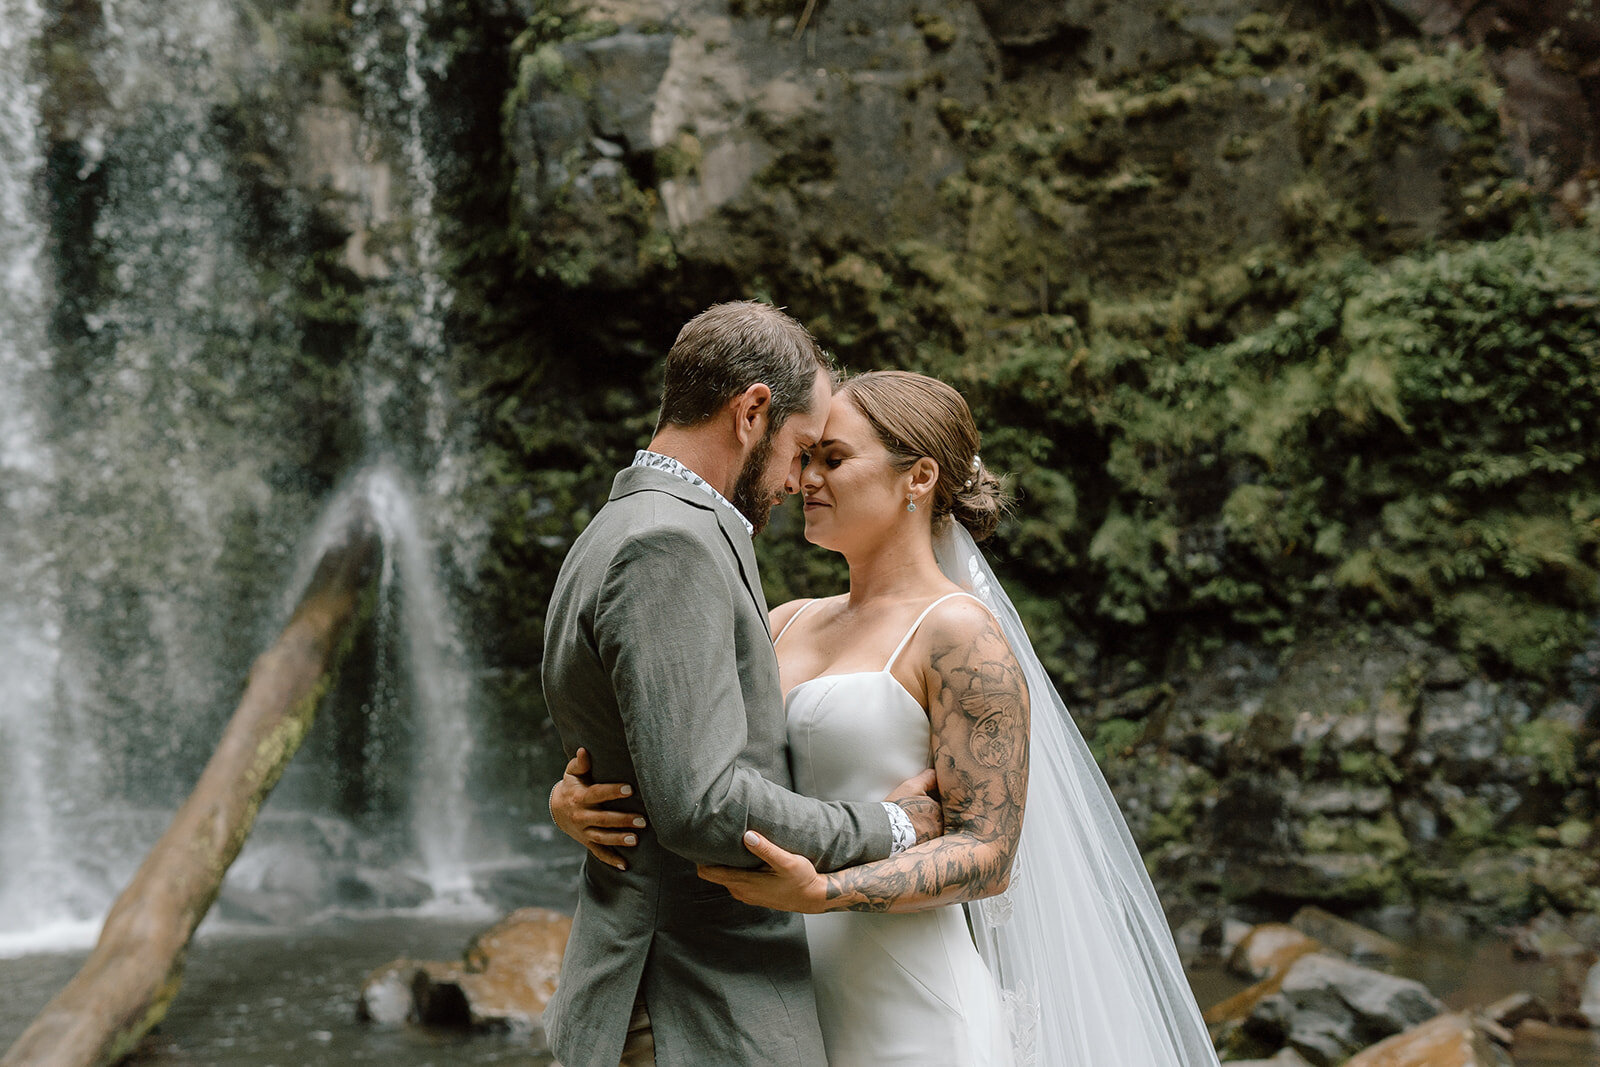 Stacey&Cory-Coast&Pines-272